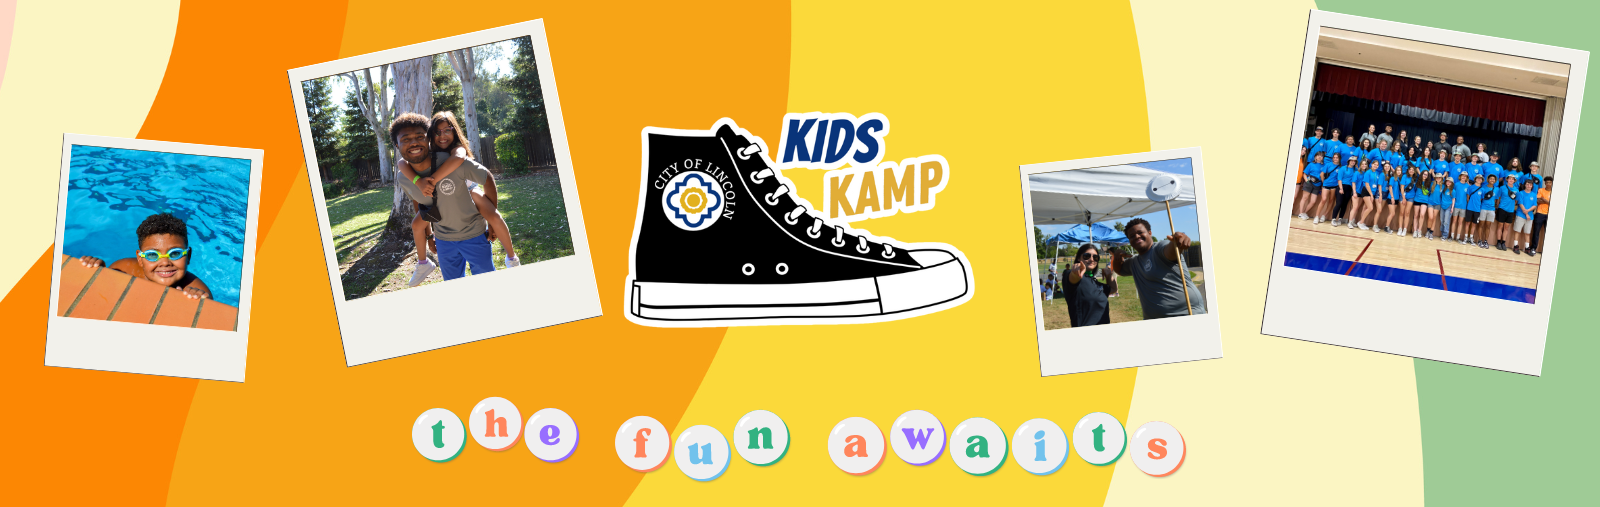 Kids Kamp Logo with picture from camp